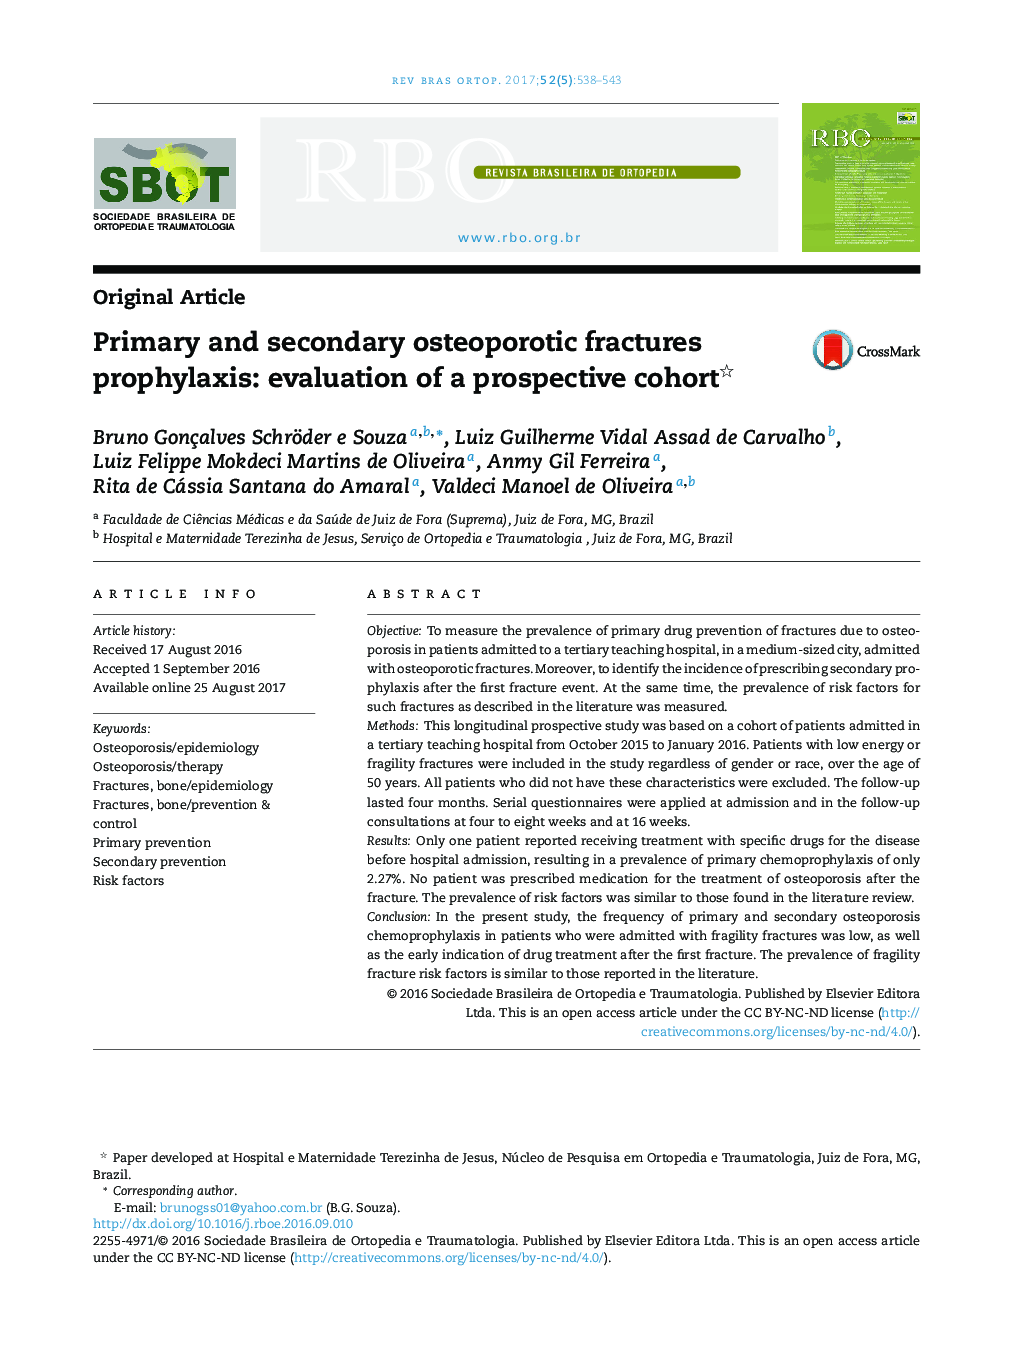 Primary and secondary osteoporotic fractures prophylaxis: evaluation of a prospective cohort